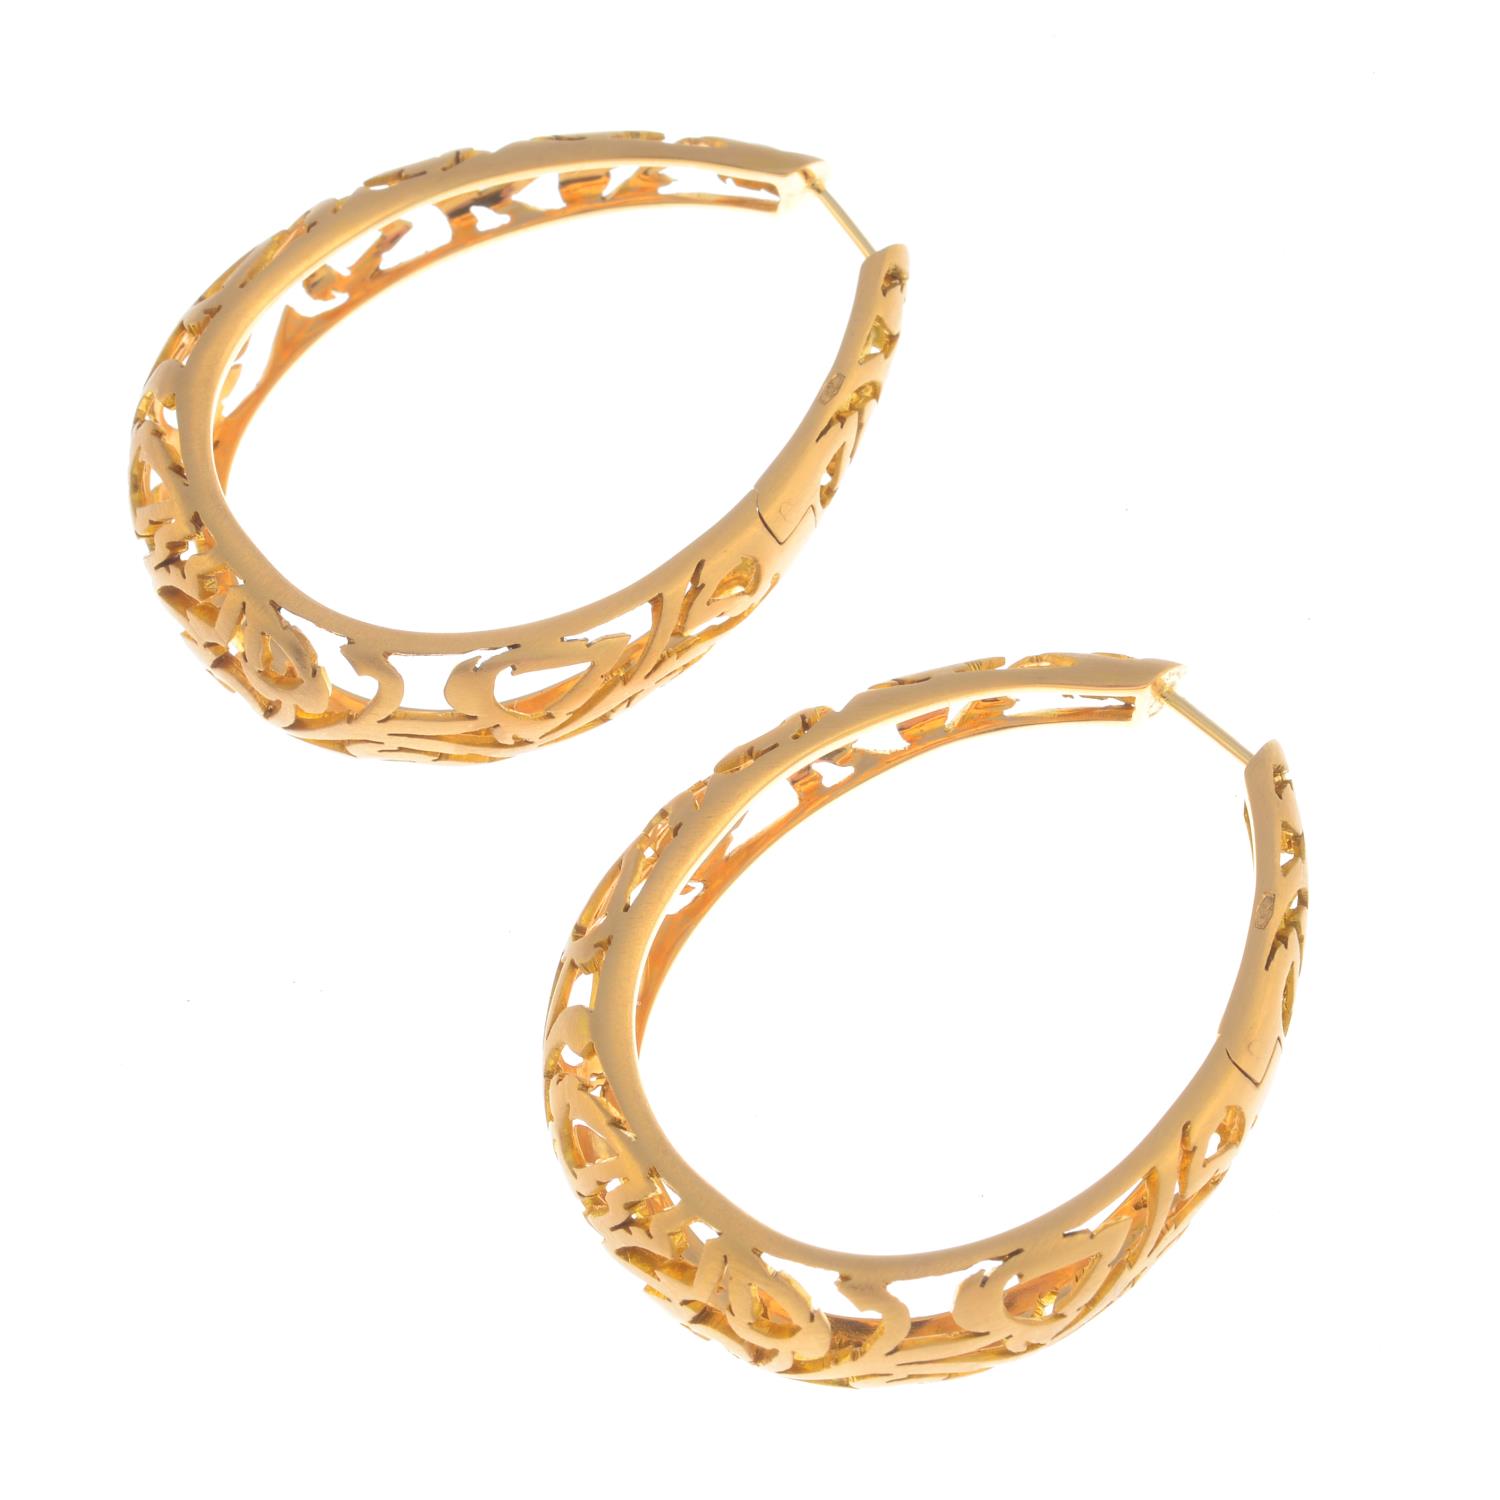 POMELLATO - a pair of 18ct gold 'Arabesque' earrings. - Image 2 of 2